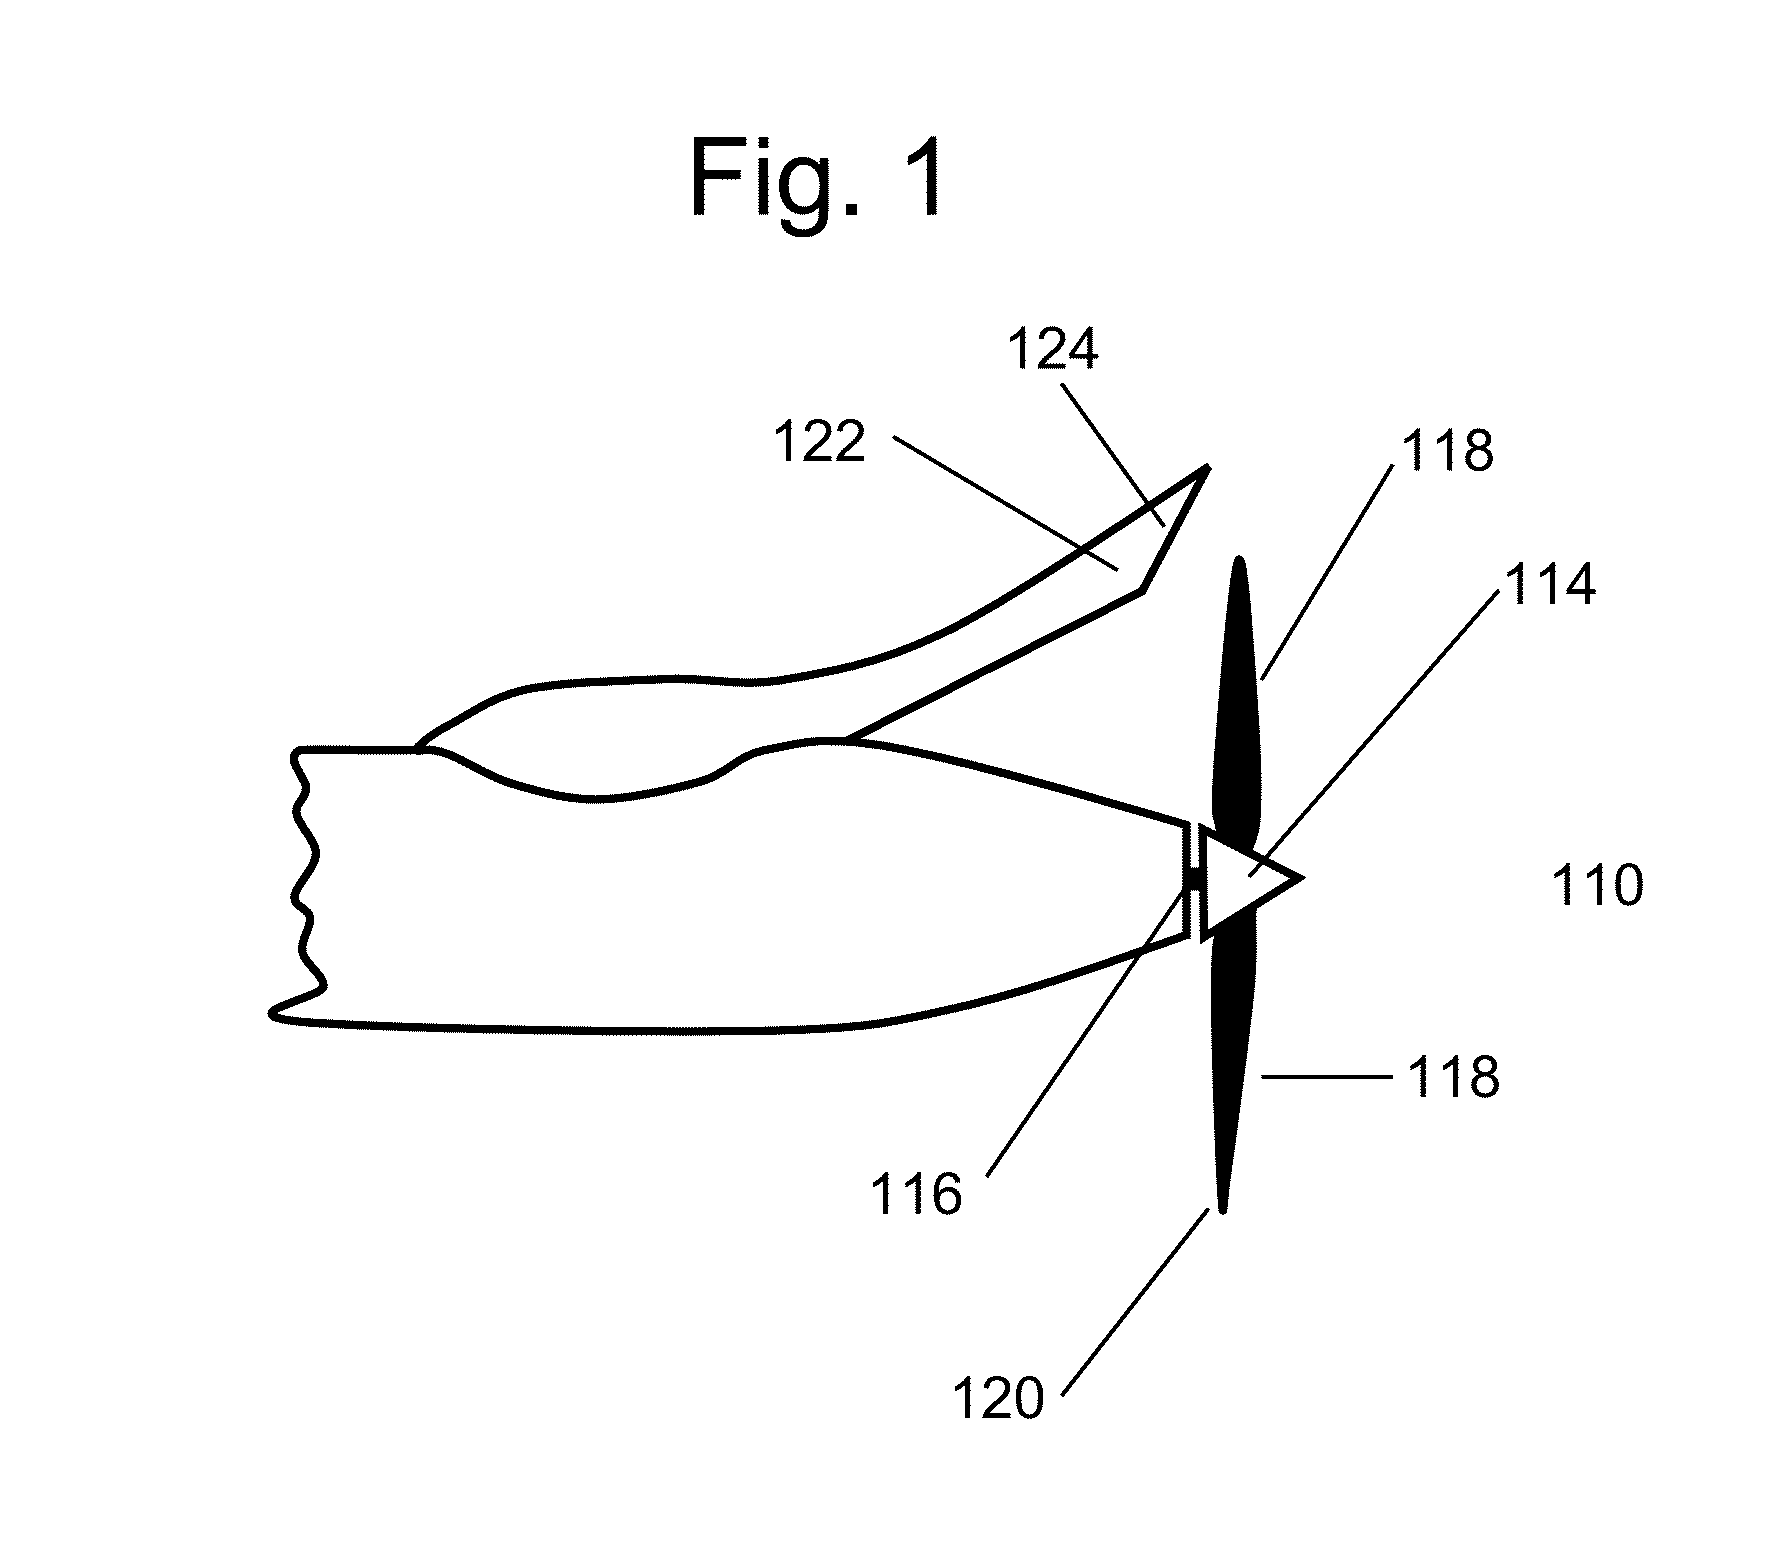 Propeller sound field modification systems and methods